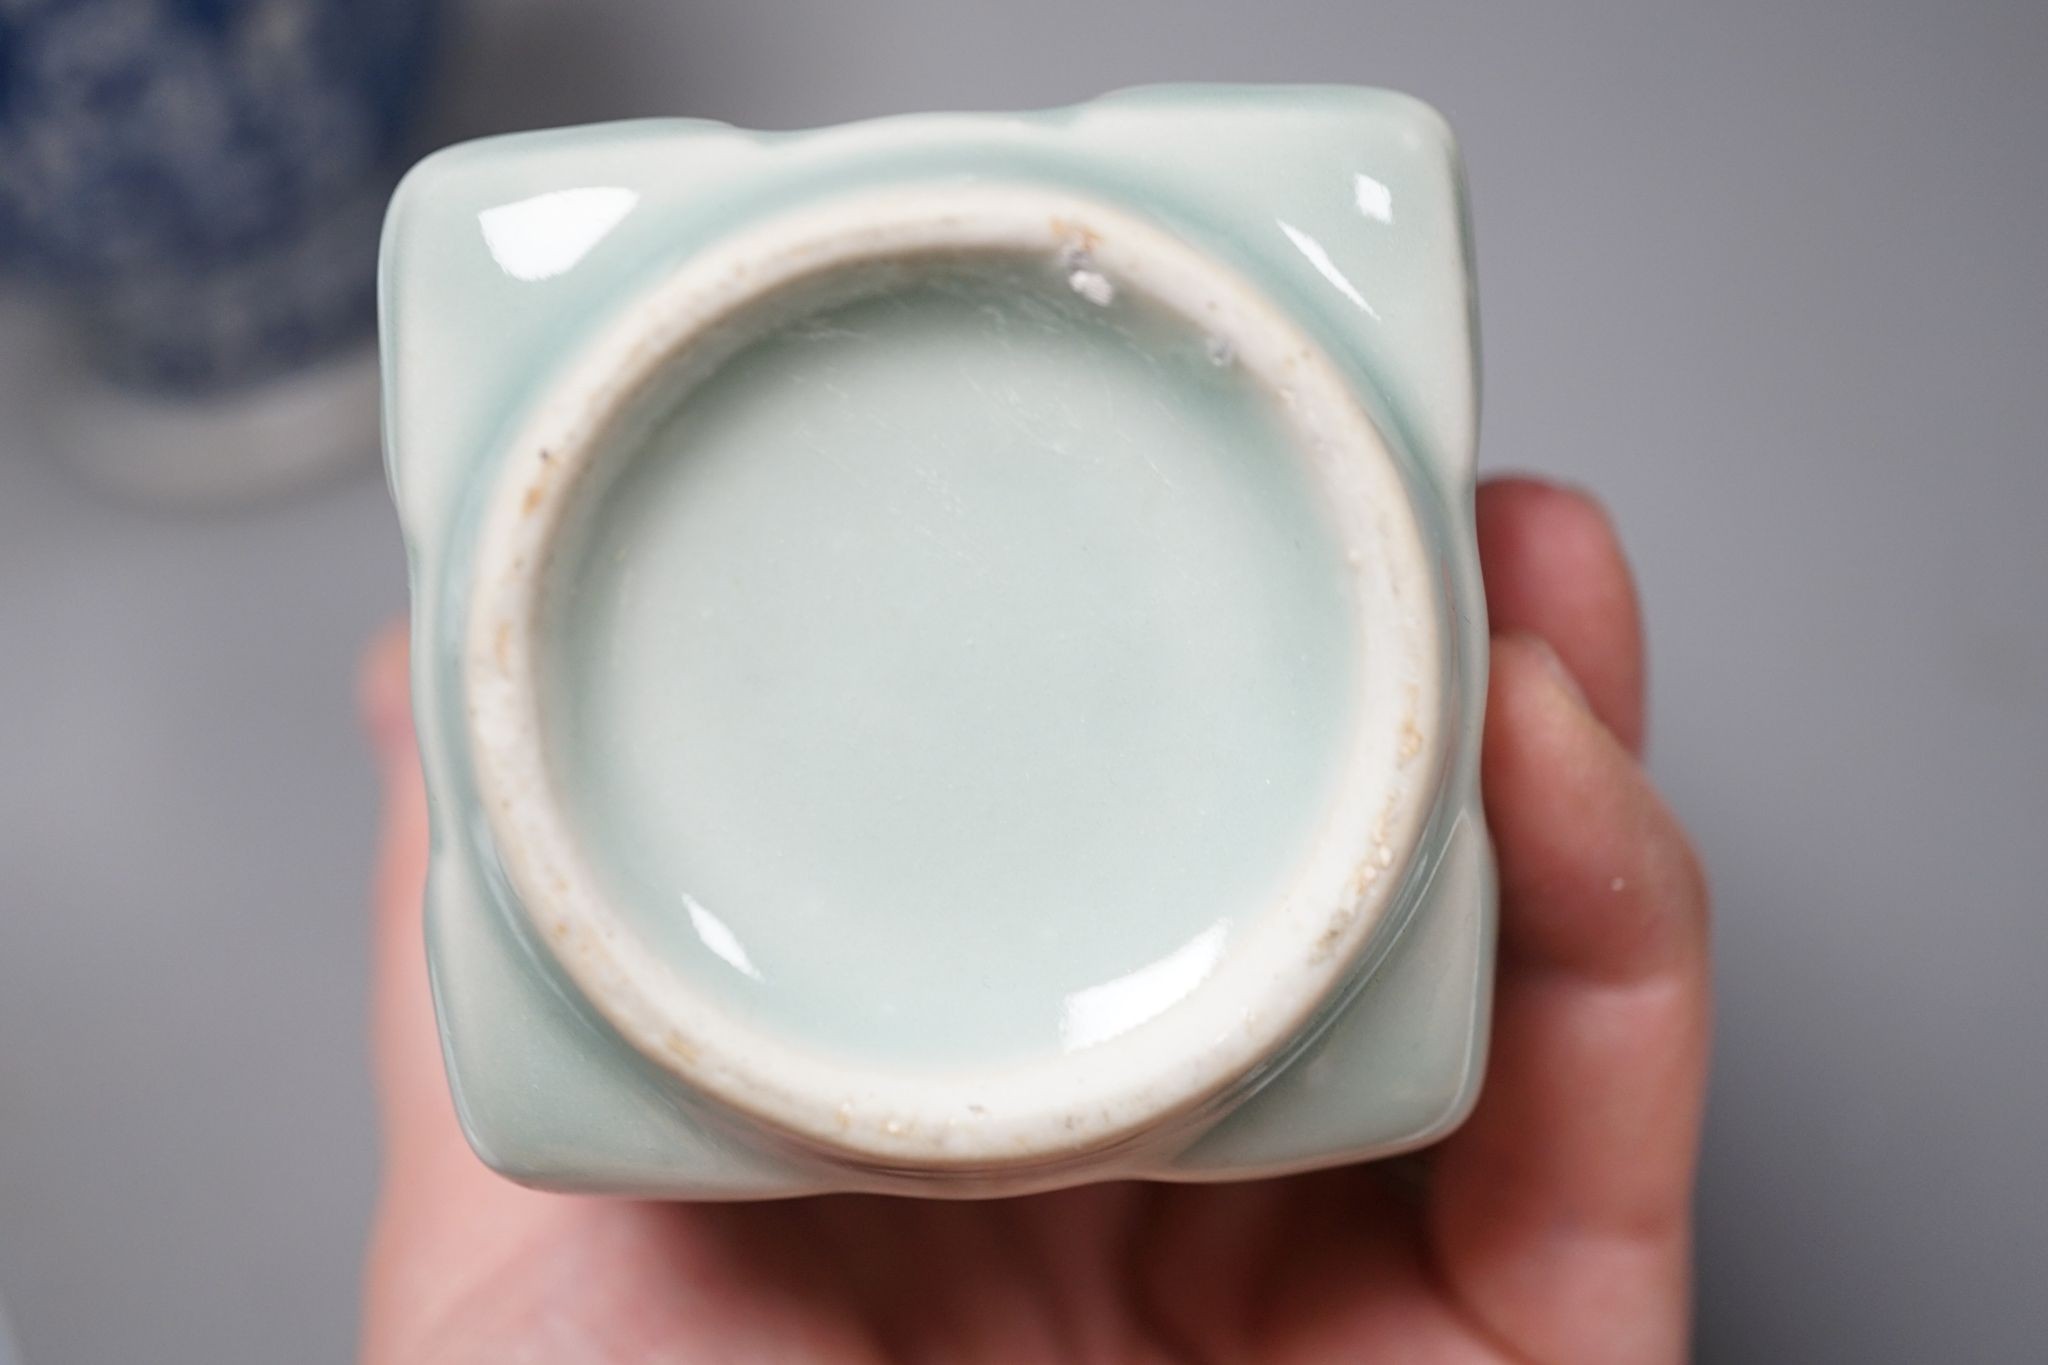 A Chinese blue and white ovoid vase, 20cm a similar dish and plates and celadon glazed vase